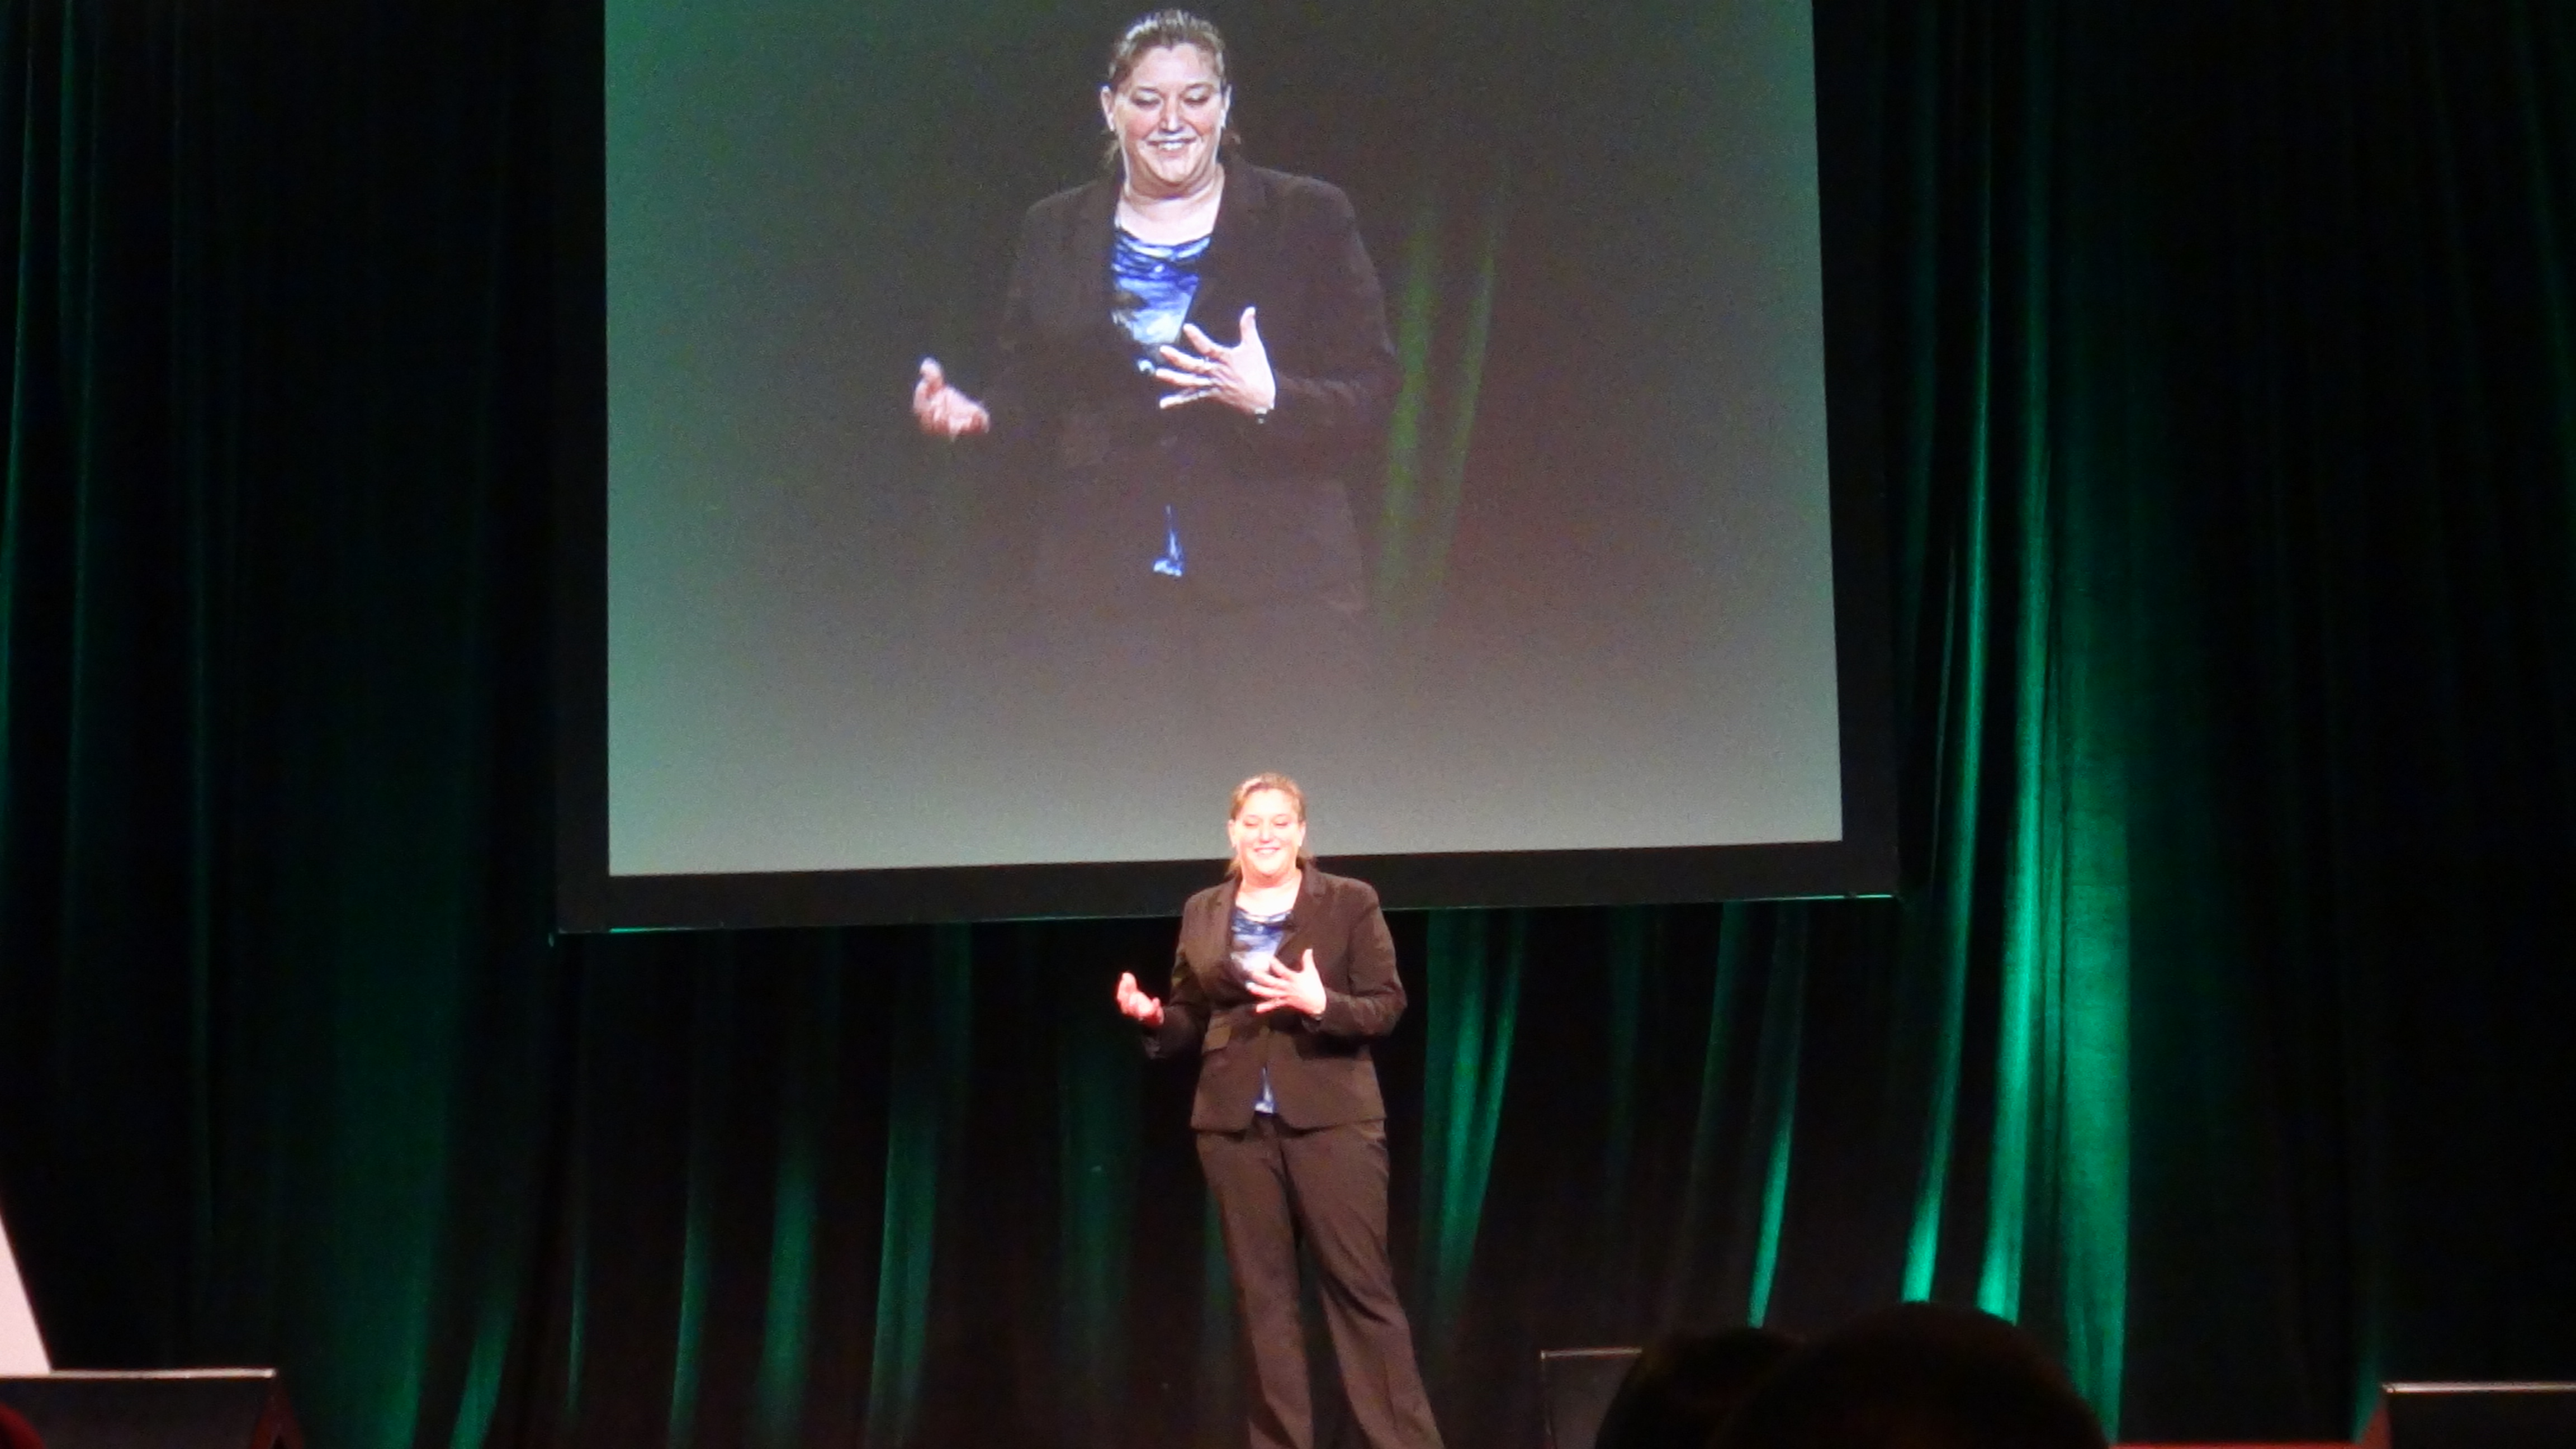 Erika a woman in a suit presenting on stage with a screen behind her and audience